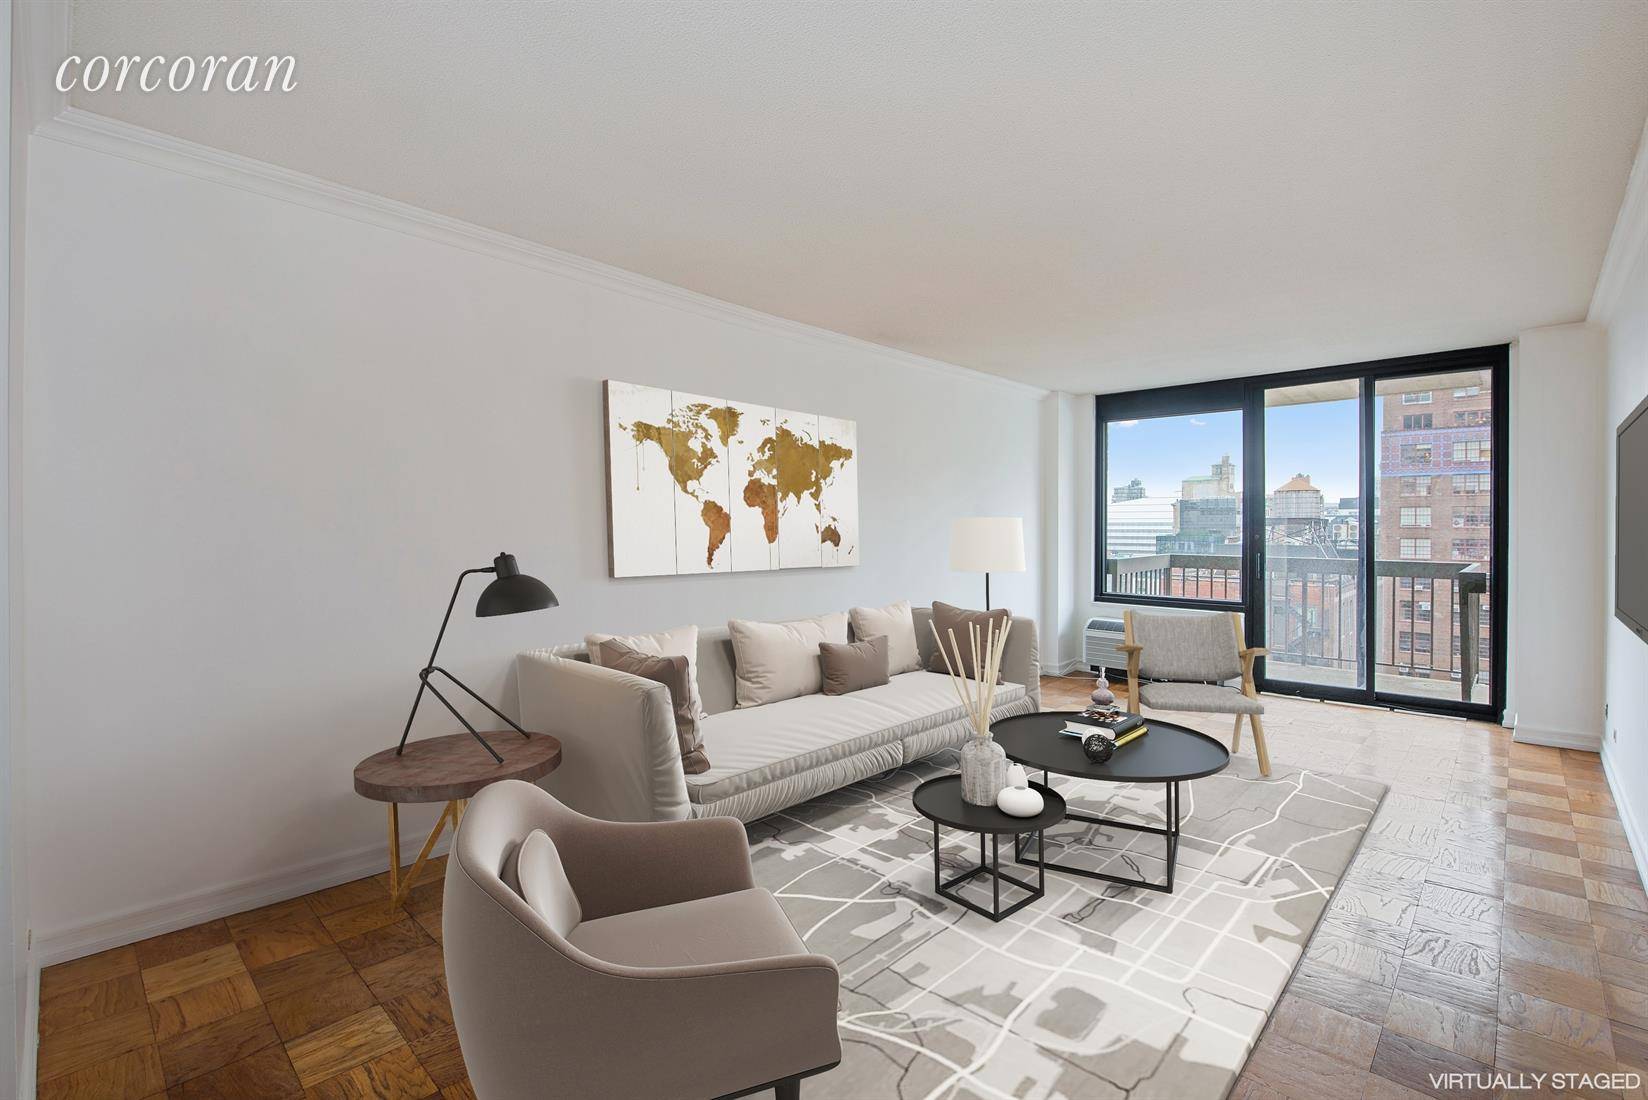 Great Location ! This boutique condo is just off Park Avenue South on the border of Nomad and Murray Hill.